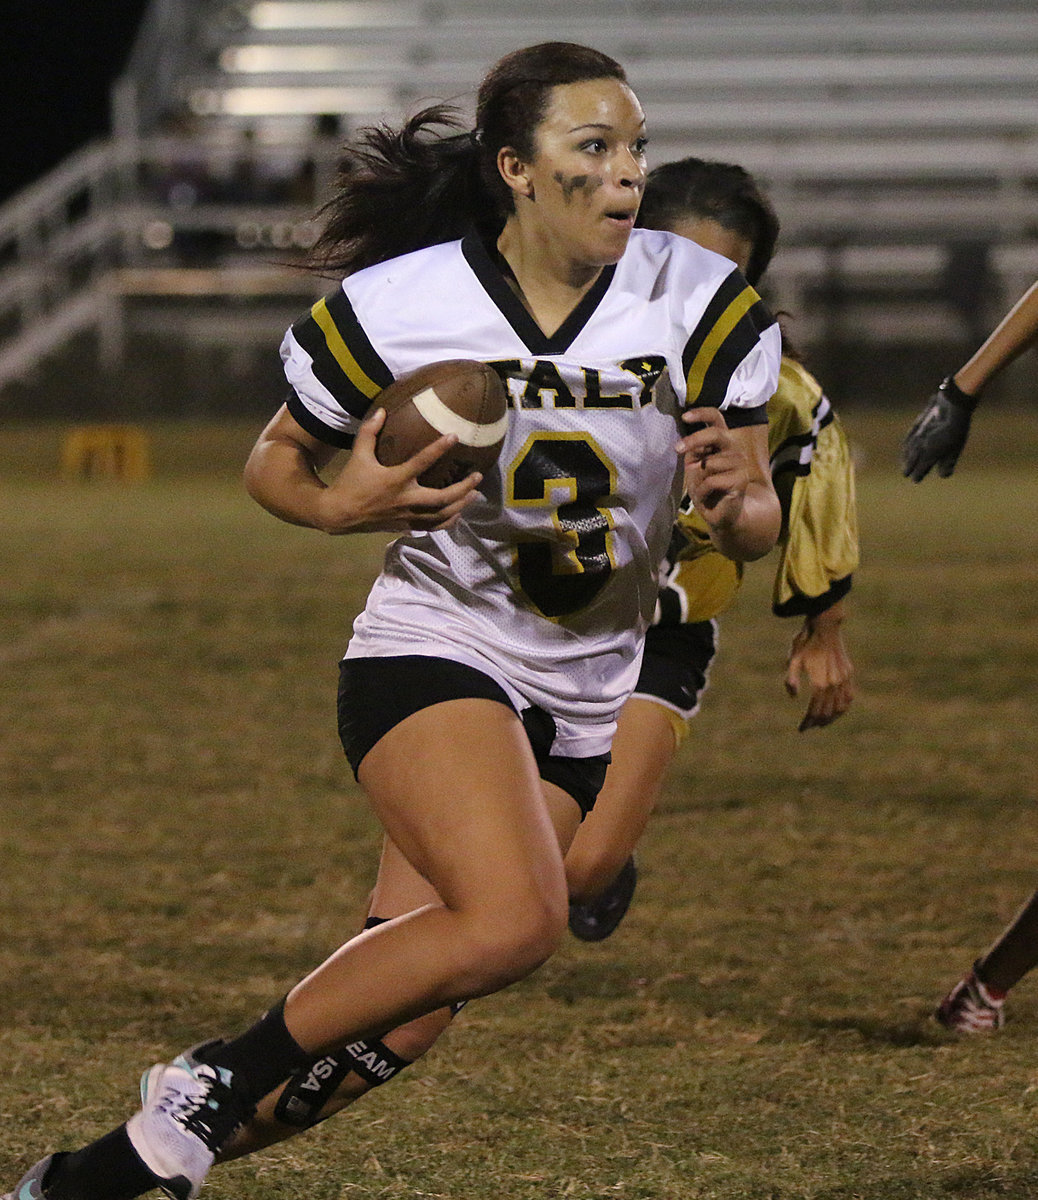 Image: Running back April Lusk helps lead her senior girls to victory with 2 rushing touchdowns in a 24-12 win over the junior girls during the Italy High School 2016 Powder Puff game.